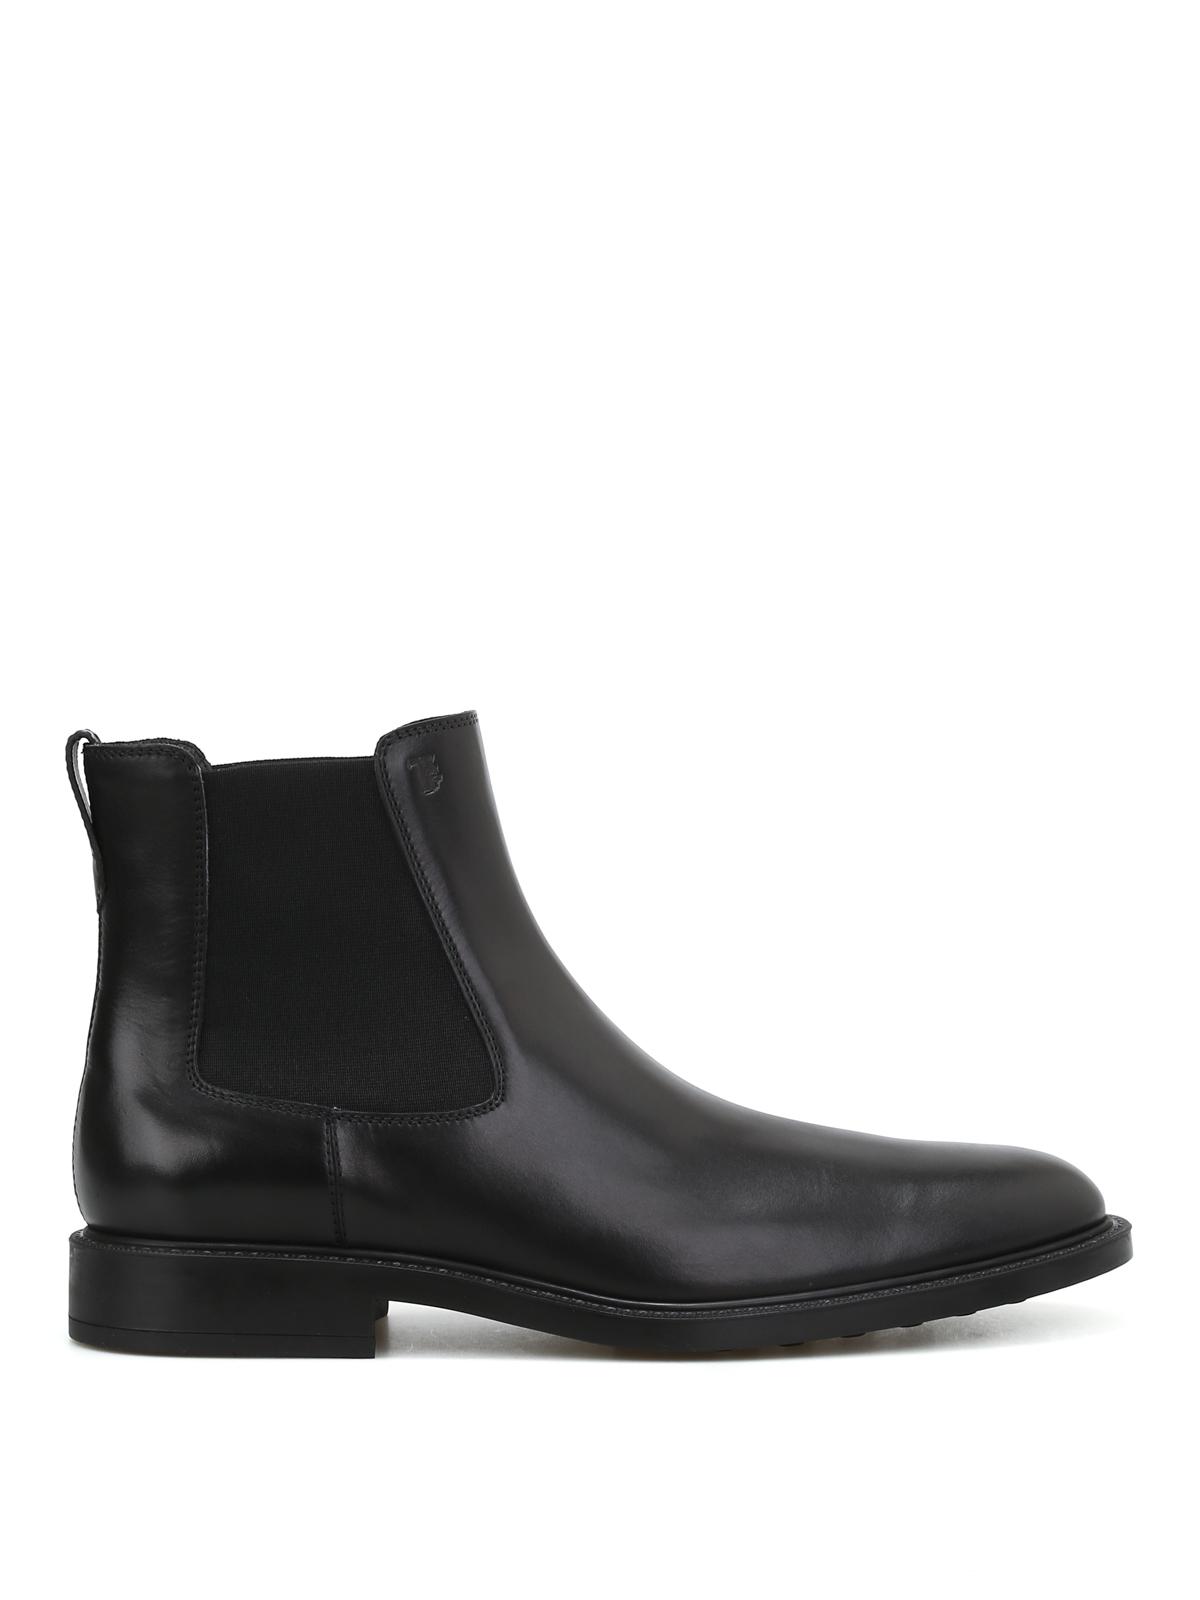 Tod's Black Leather Slip-on Booties for Men - Lyst